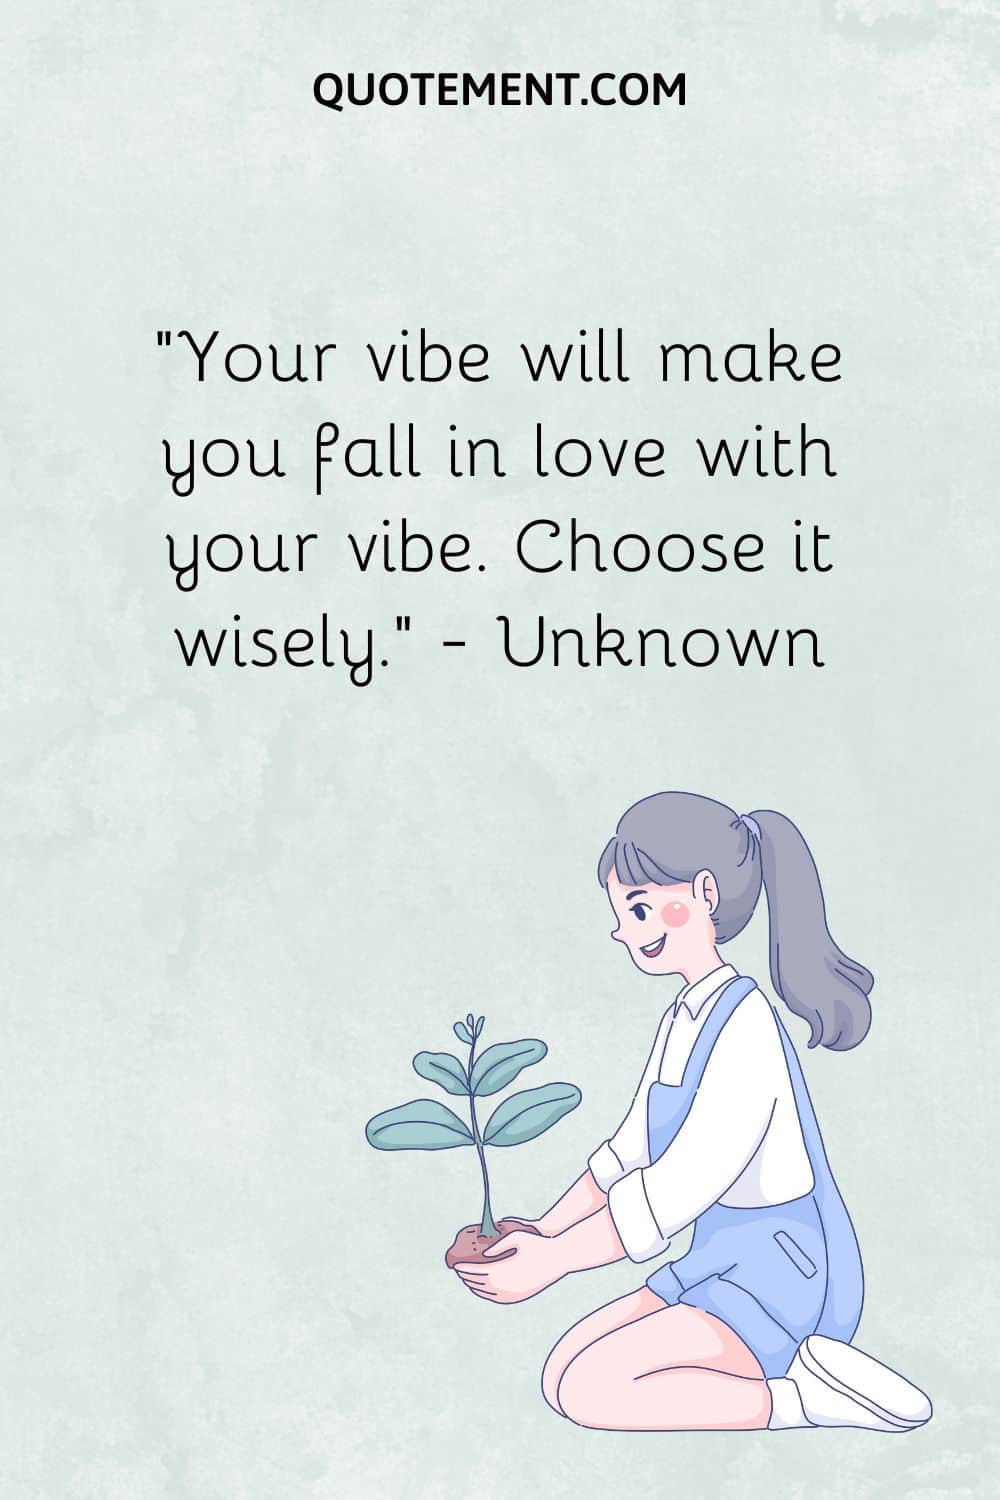 Your vibe will make you fall in love with your vibe